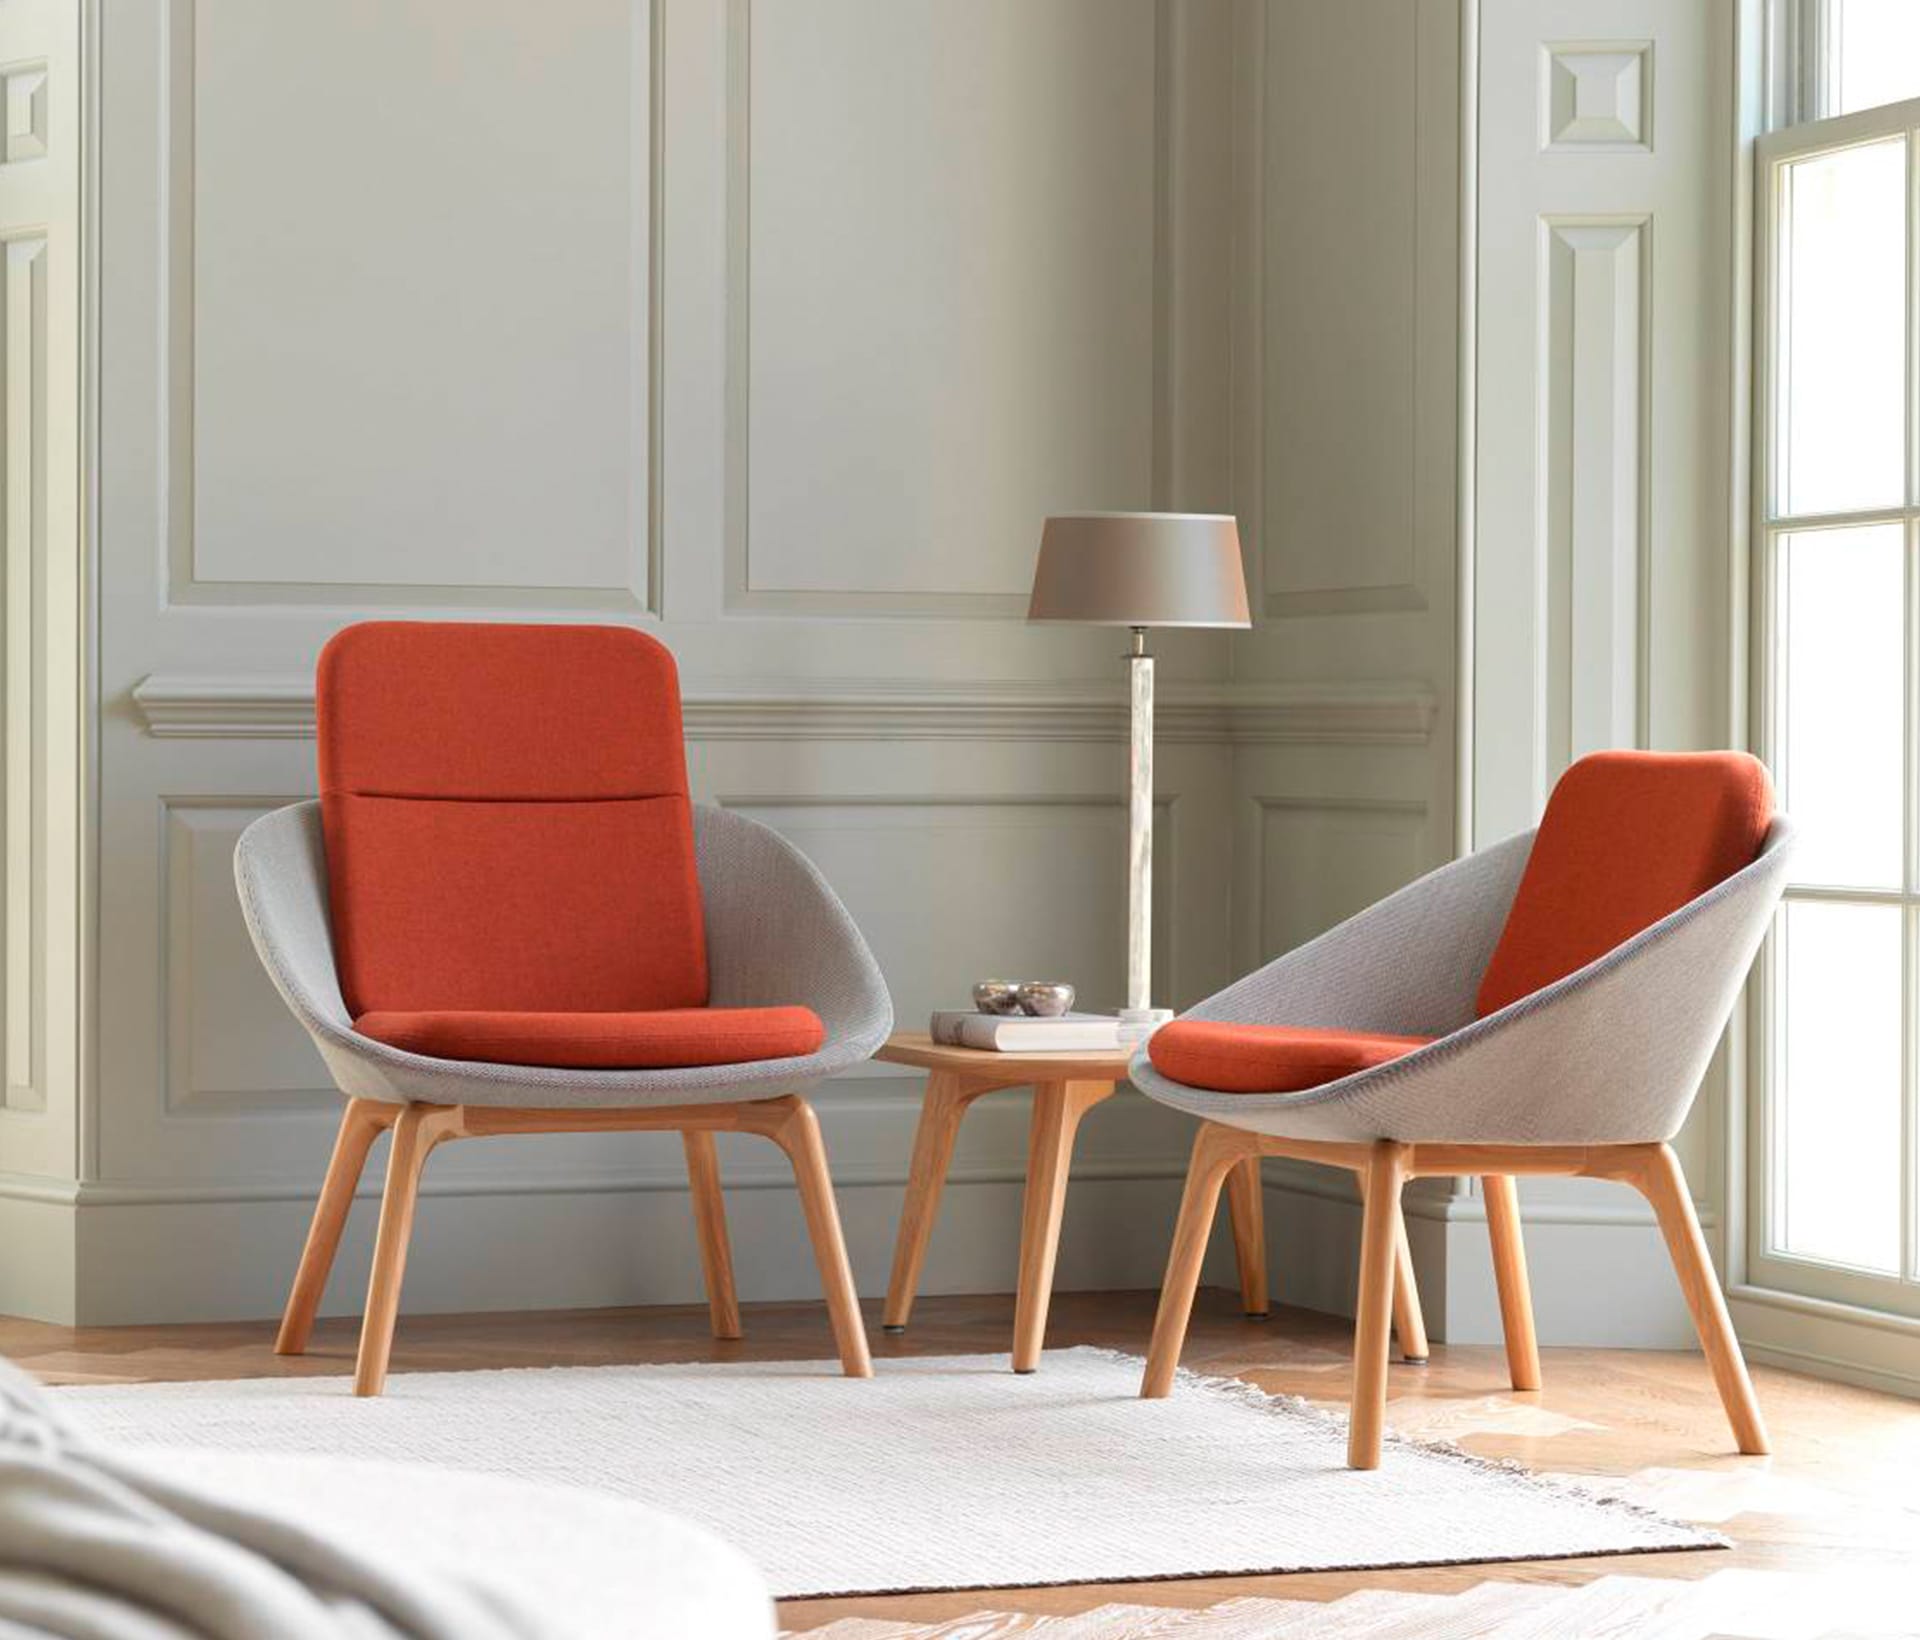 Two orange and grey lounge chairs for offices in a room.